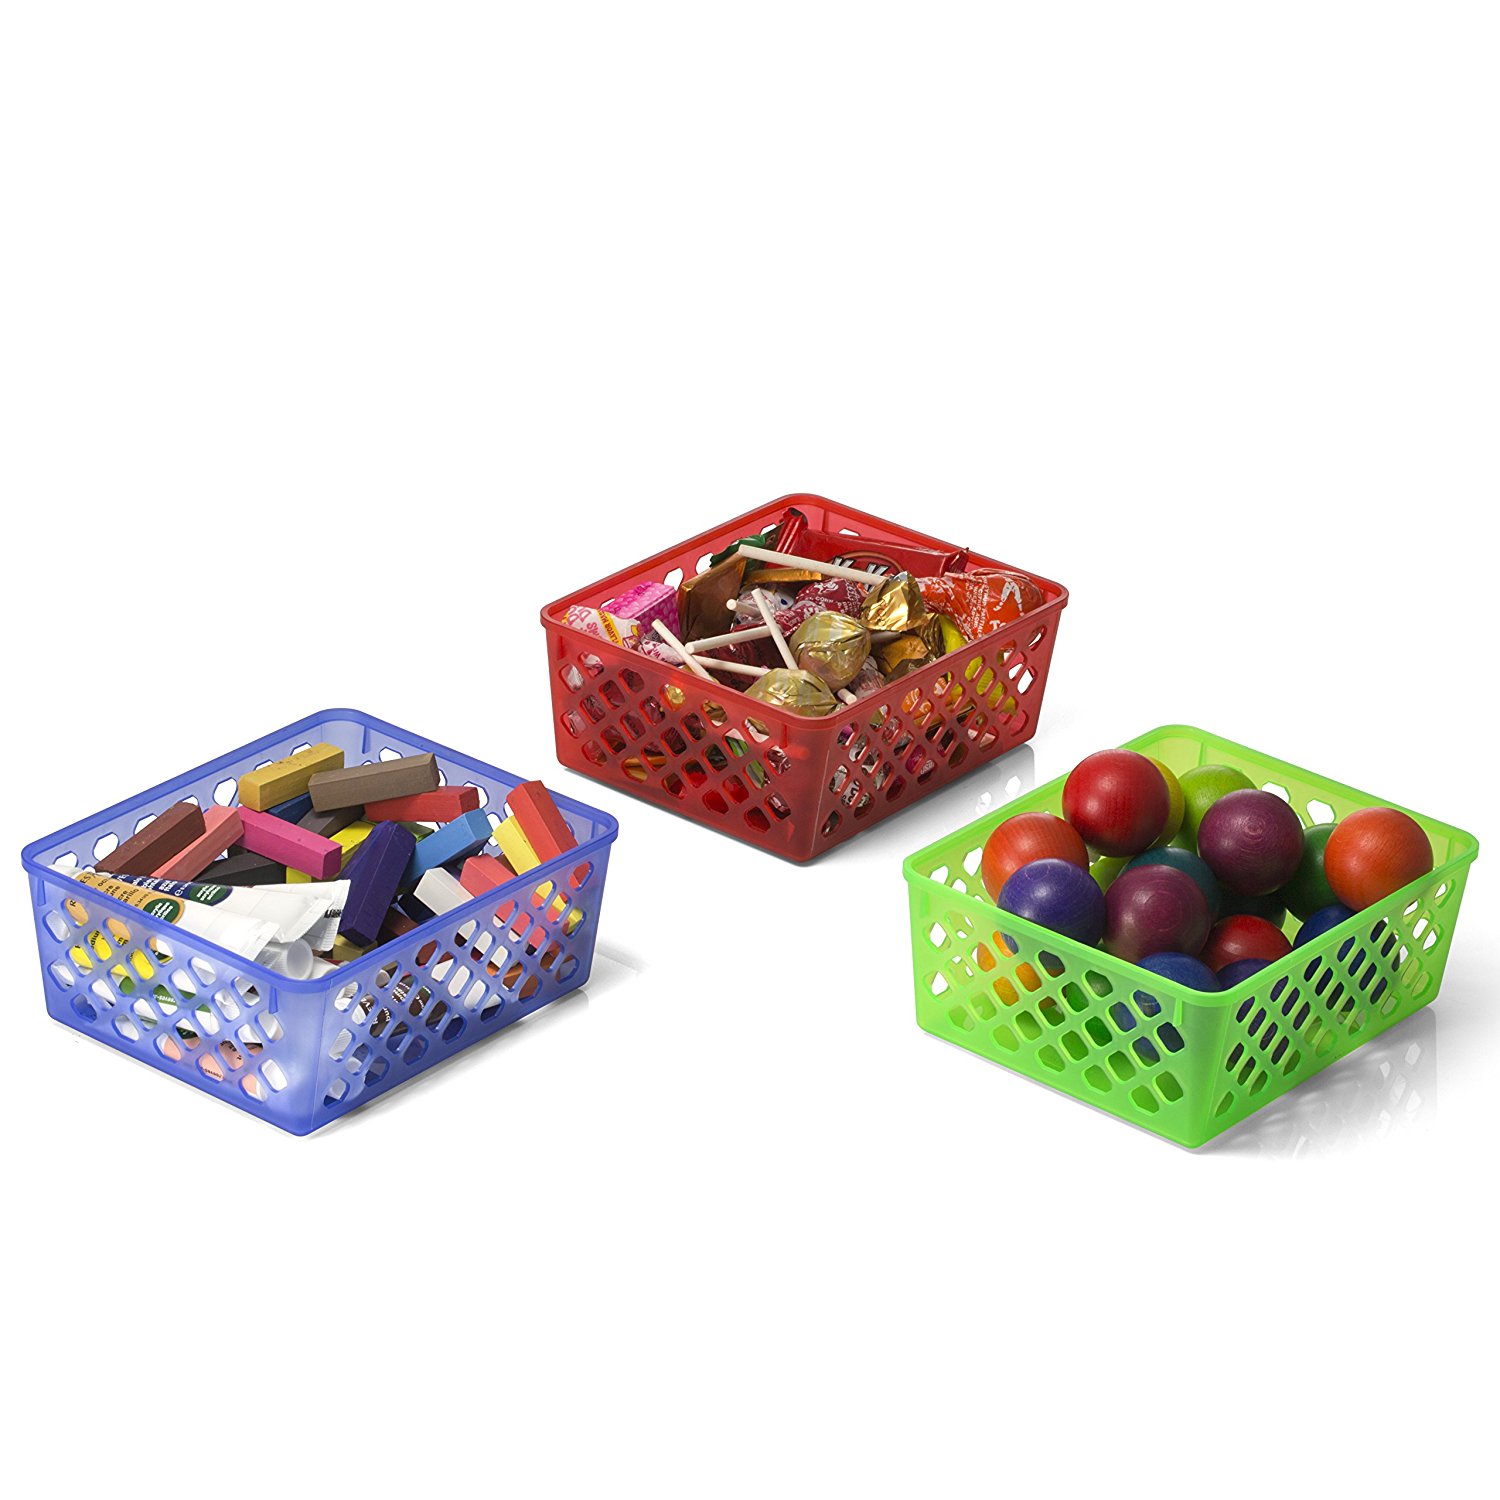 Ideal for storing loose supplies, crafts, and more